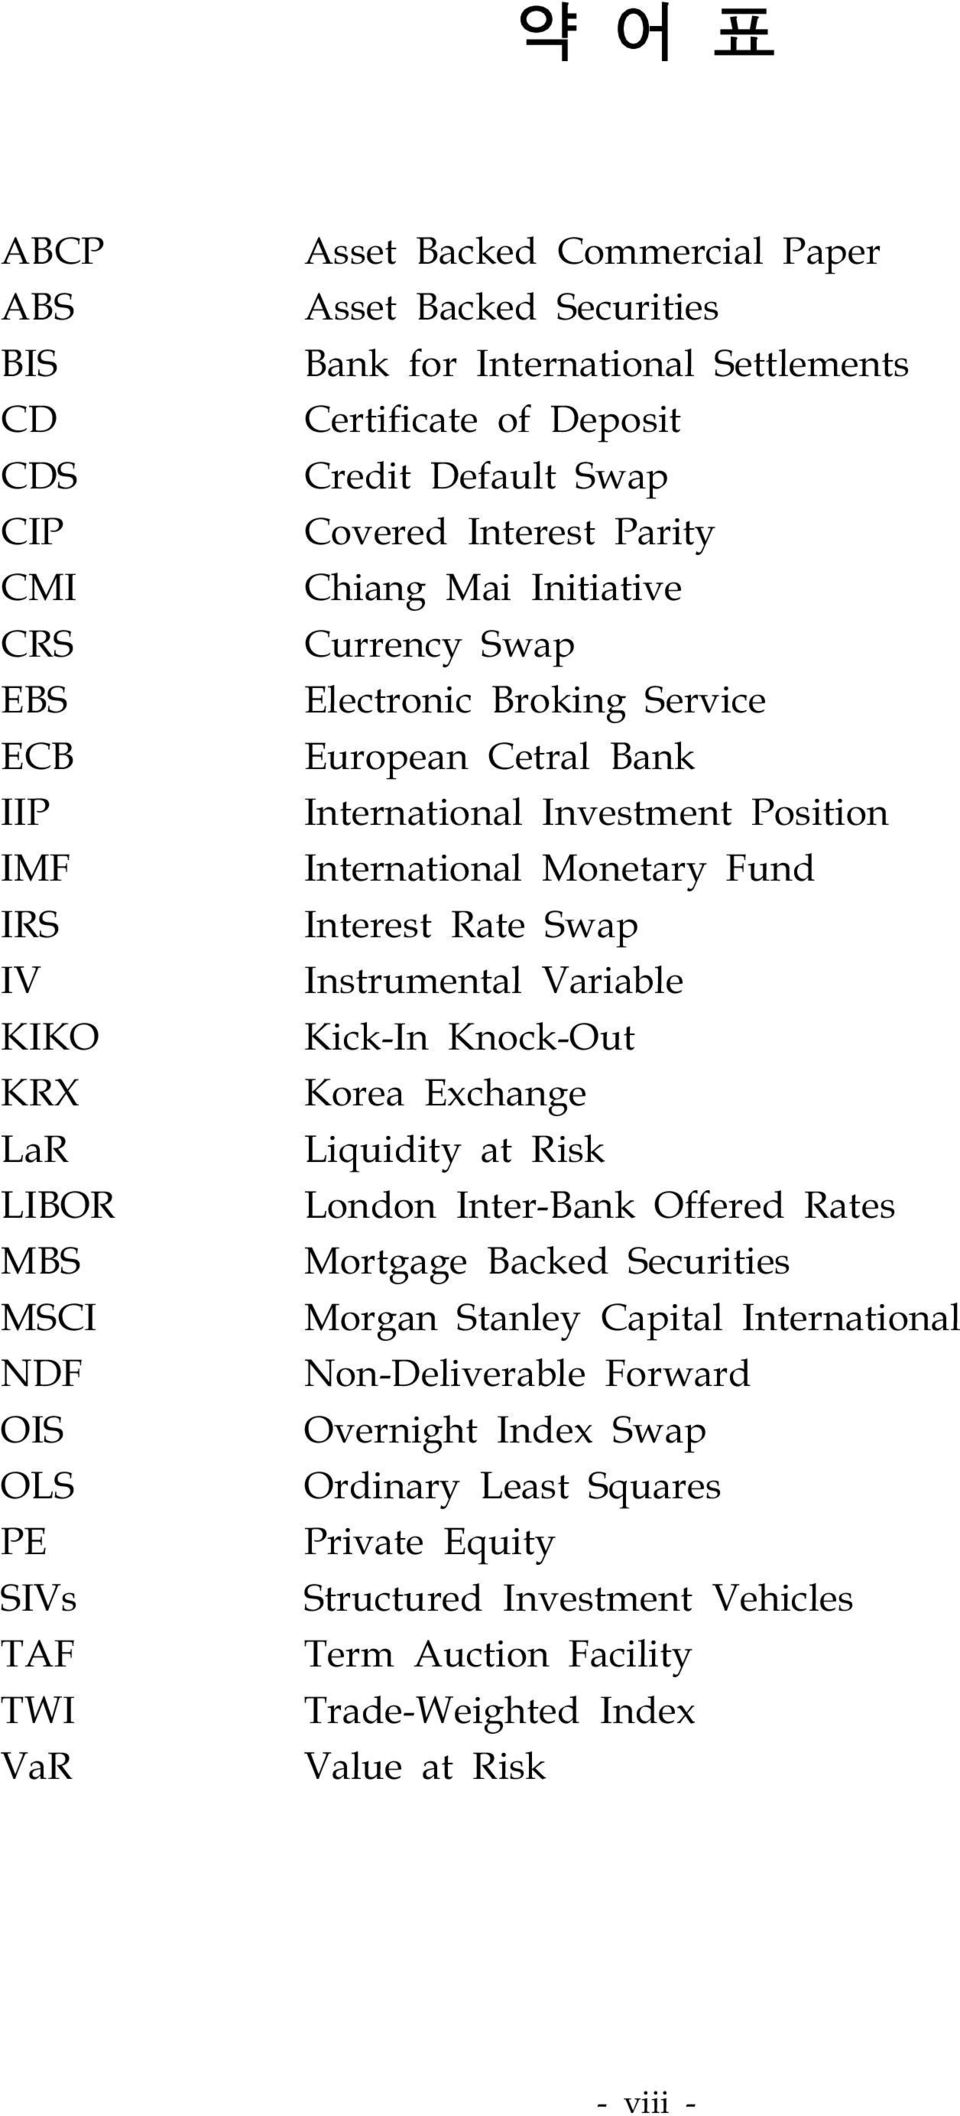 International Monetary Fund Interest Rate Swap Instrumental Variable Kick-In Knock-Out Korea Exchange Liquidity at Risk London Inter-Bank Offered Rates Mortgage Backed Securities Morgan Stanley